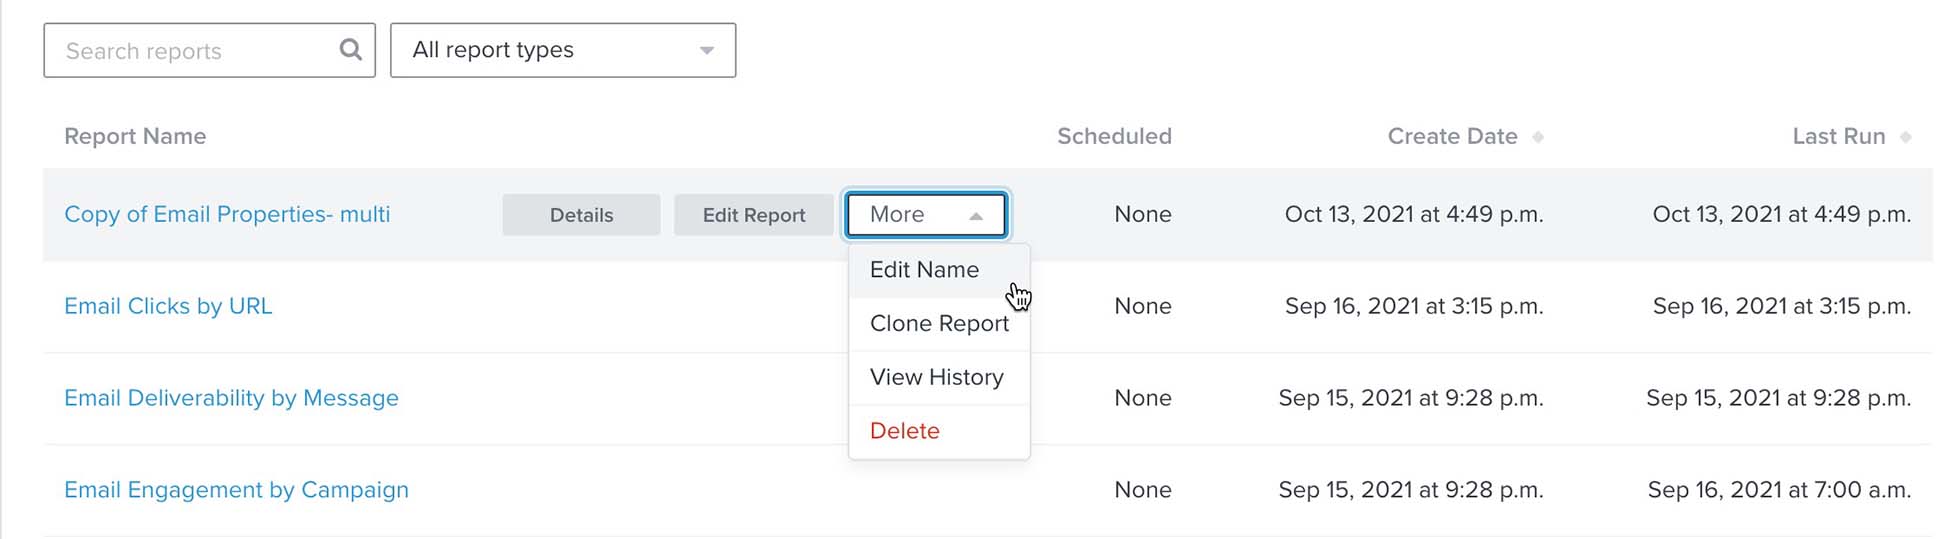 Inside reports view with more dropdown opened from top menu and edit name chosen